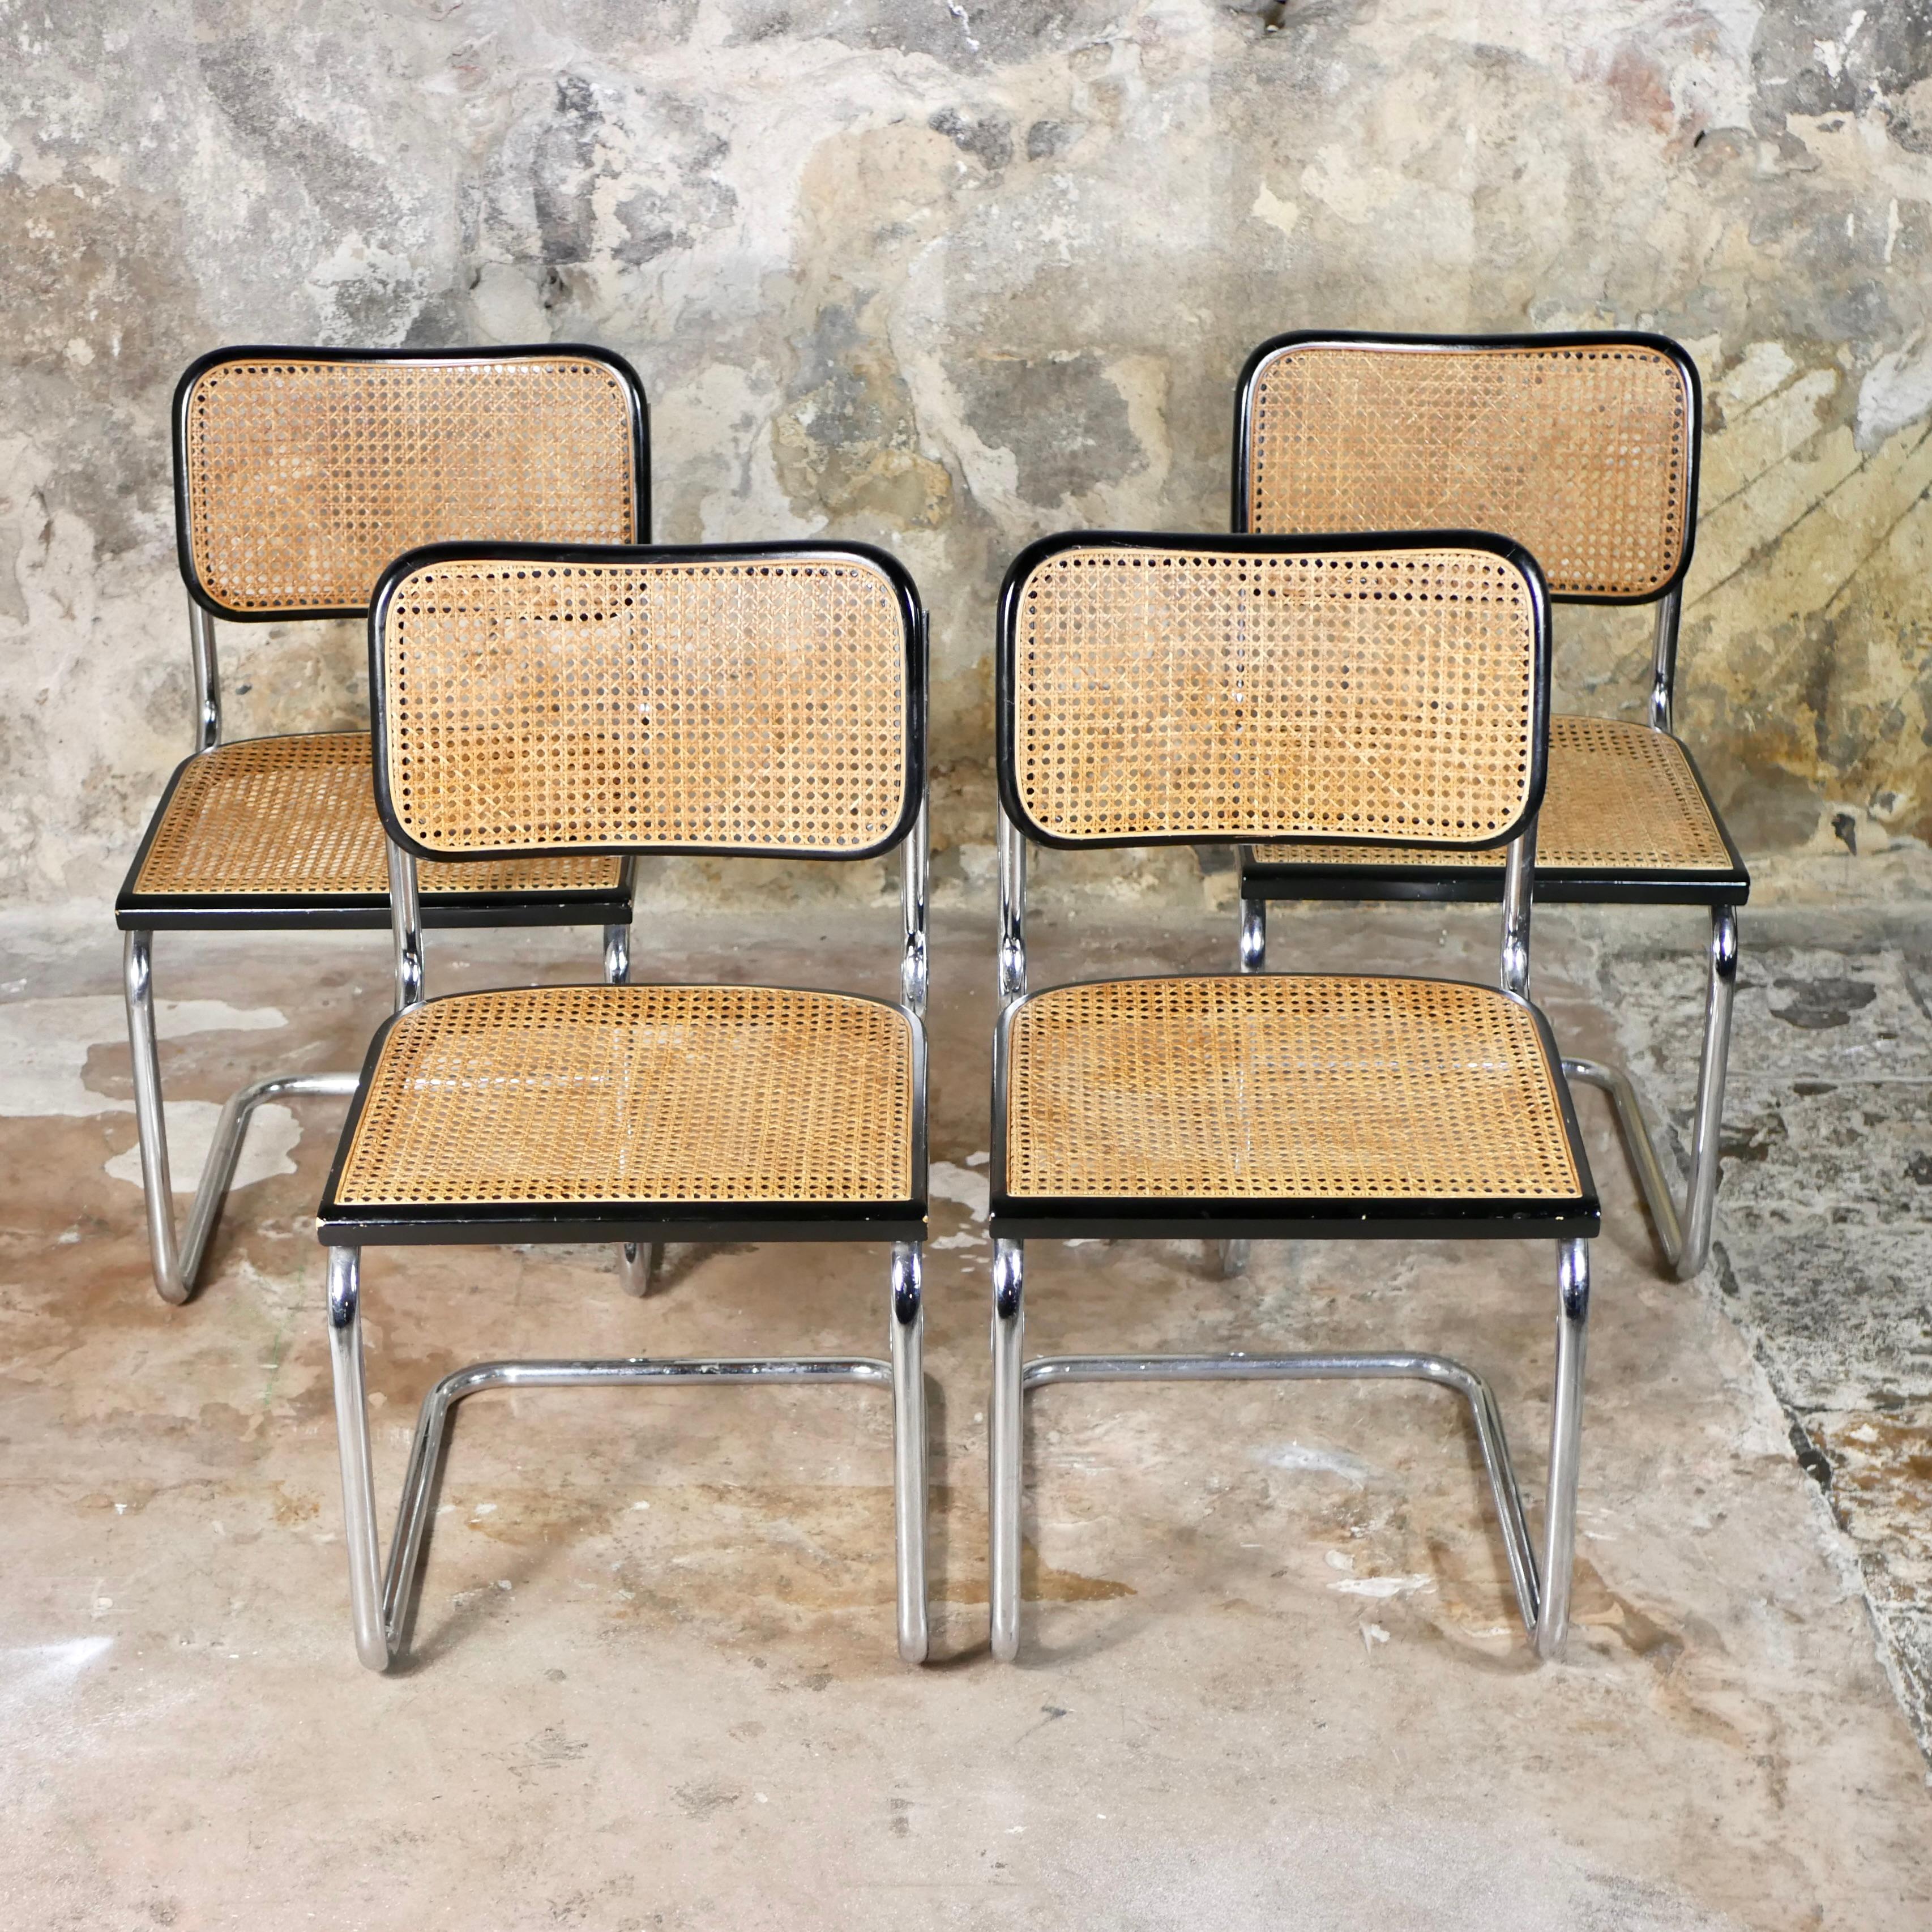 Italian Set of 4 Cesca chairs designed by Marcel Breuer, made in Italy, 1970